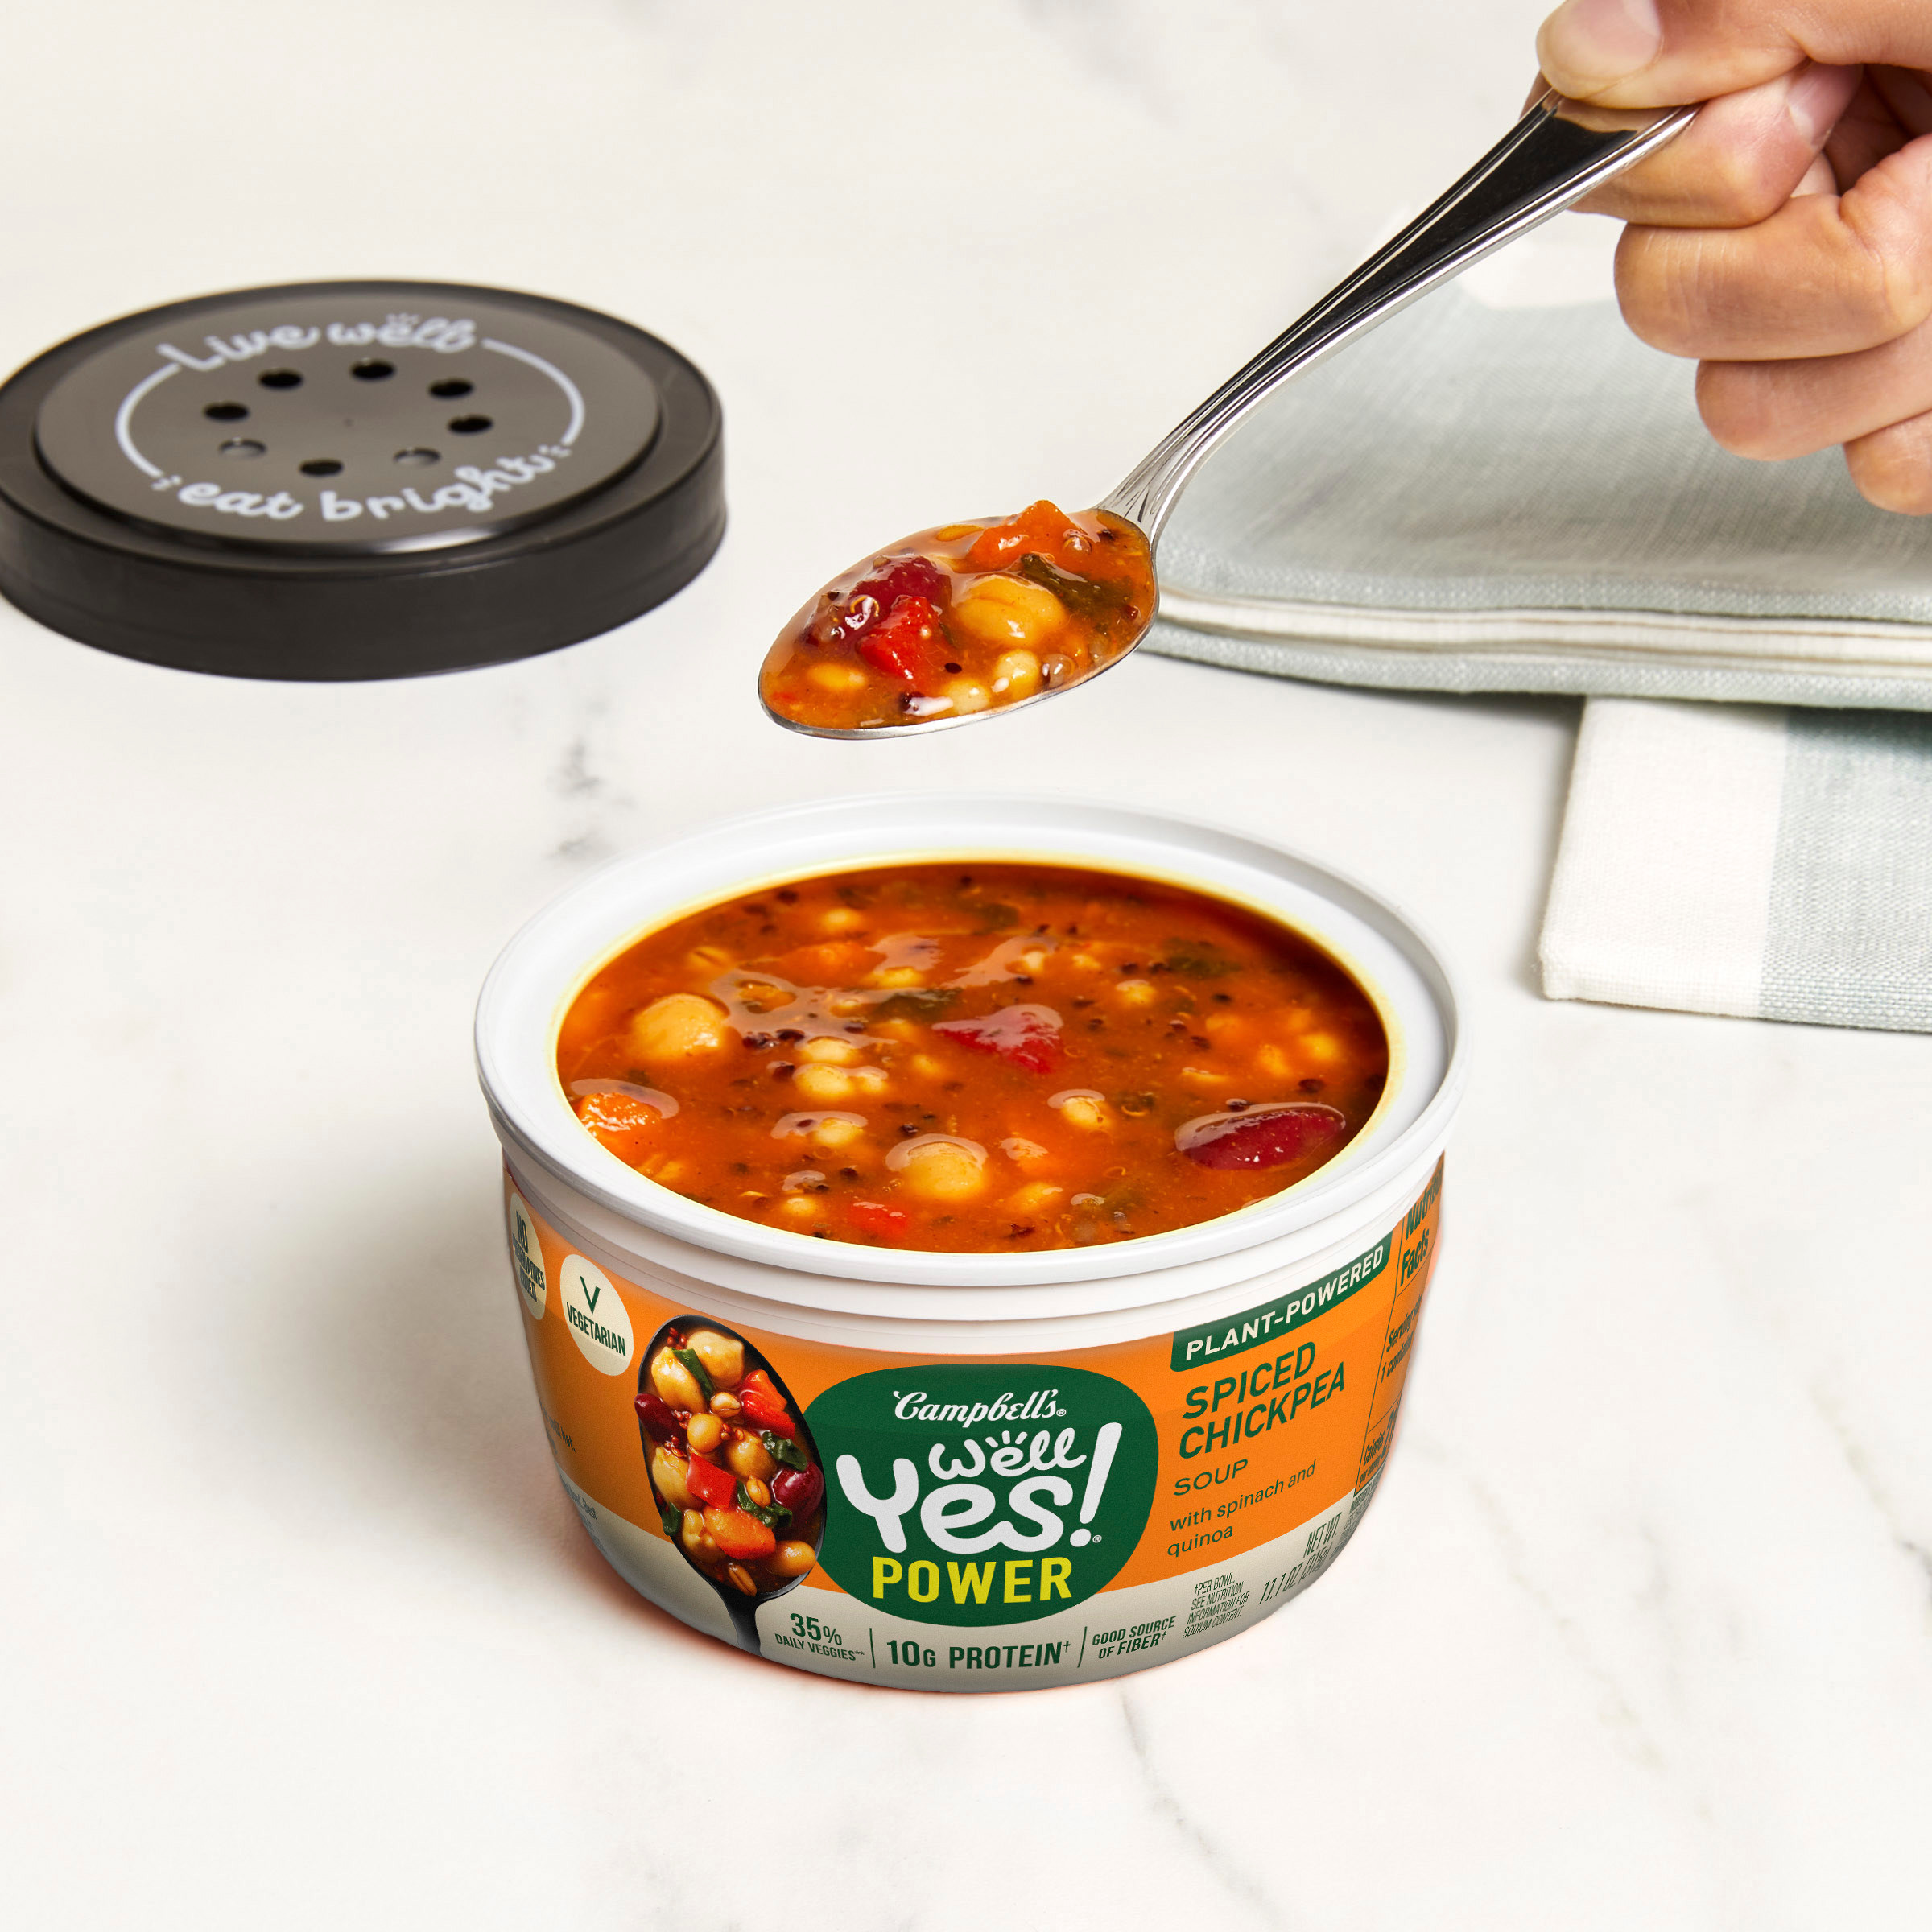 https://www.campbells.com/wp-content/uploads/2022/11/F23-Well-Yes-Power-Bowl-Spiced-Chickpea-Spoon-Lift-Lifestyle-eComm.jpg